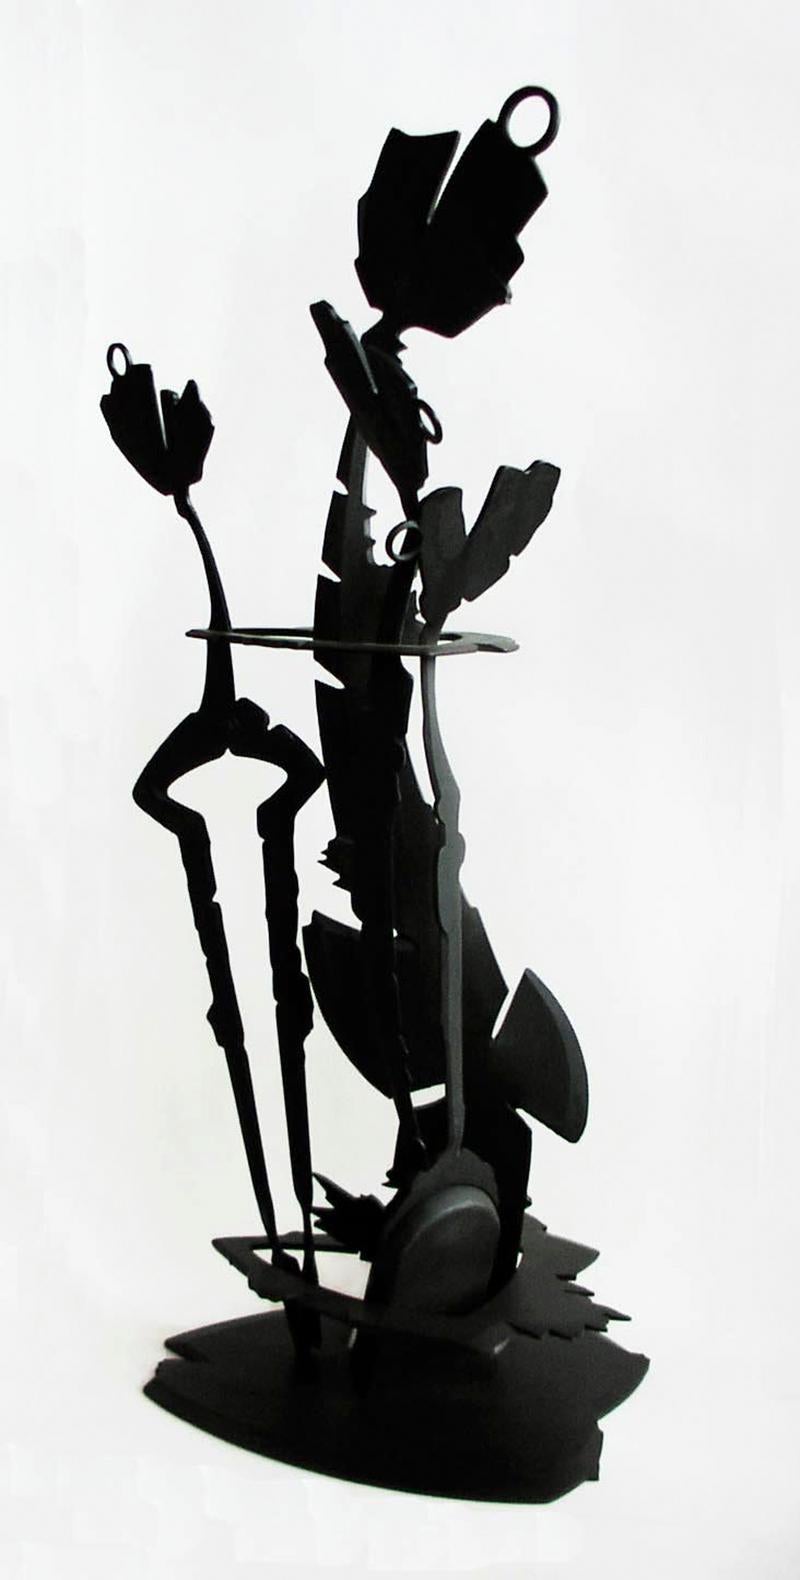 Fabricated Fireplace Tools are forged and fabricated steel fireplace tools by metal artist Albert Paley.

Albert Paley (born 1944) is an American modernist metal sculptor. Initially starting out as a jeweler, Paley has become one of the most